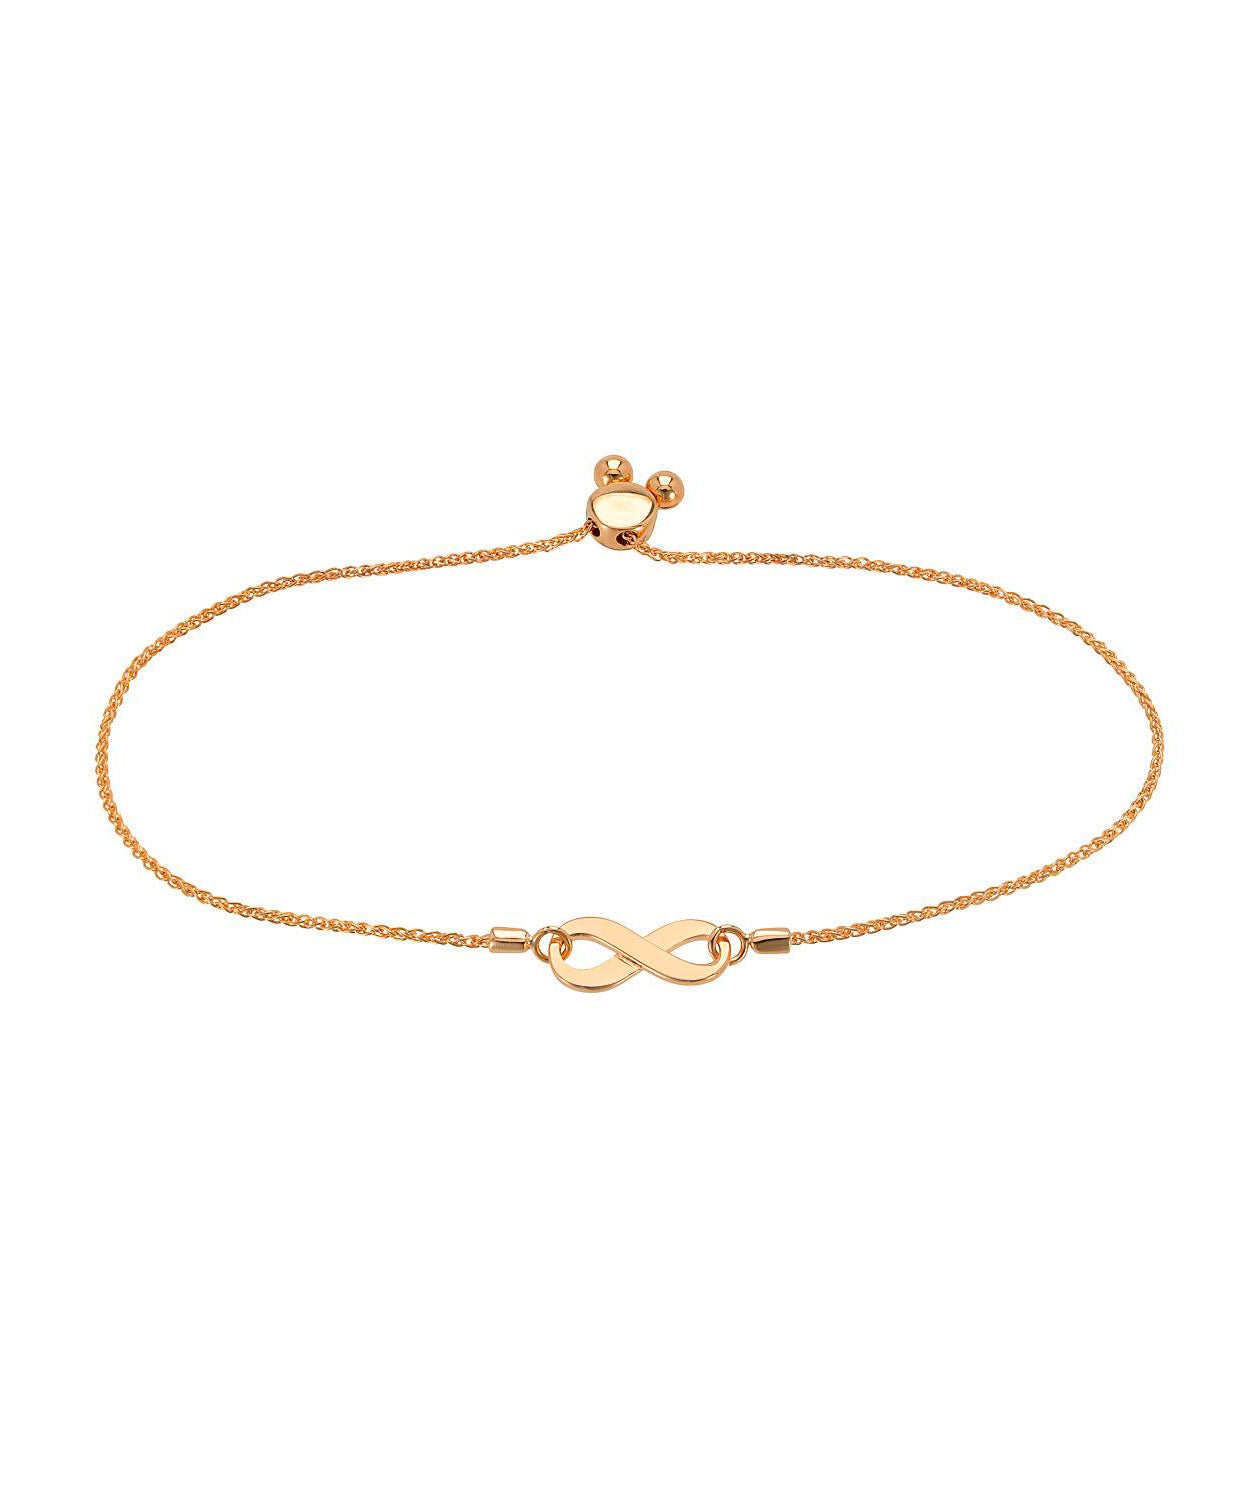 14k Gold Infinity Bolo Bracelet - Made in Italy View 2